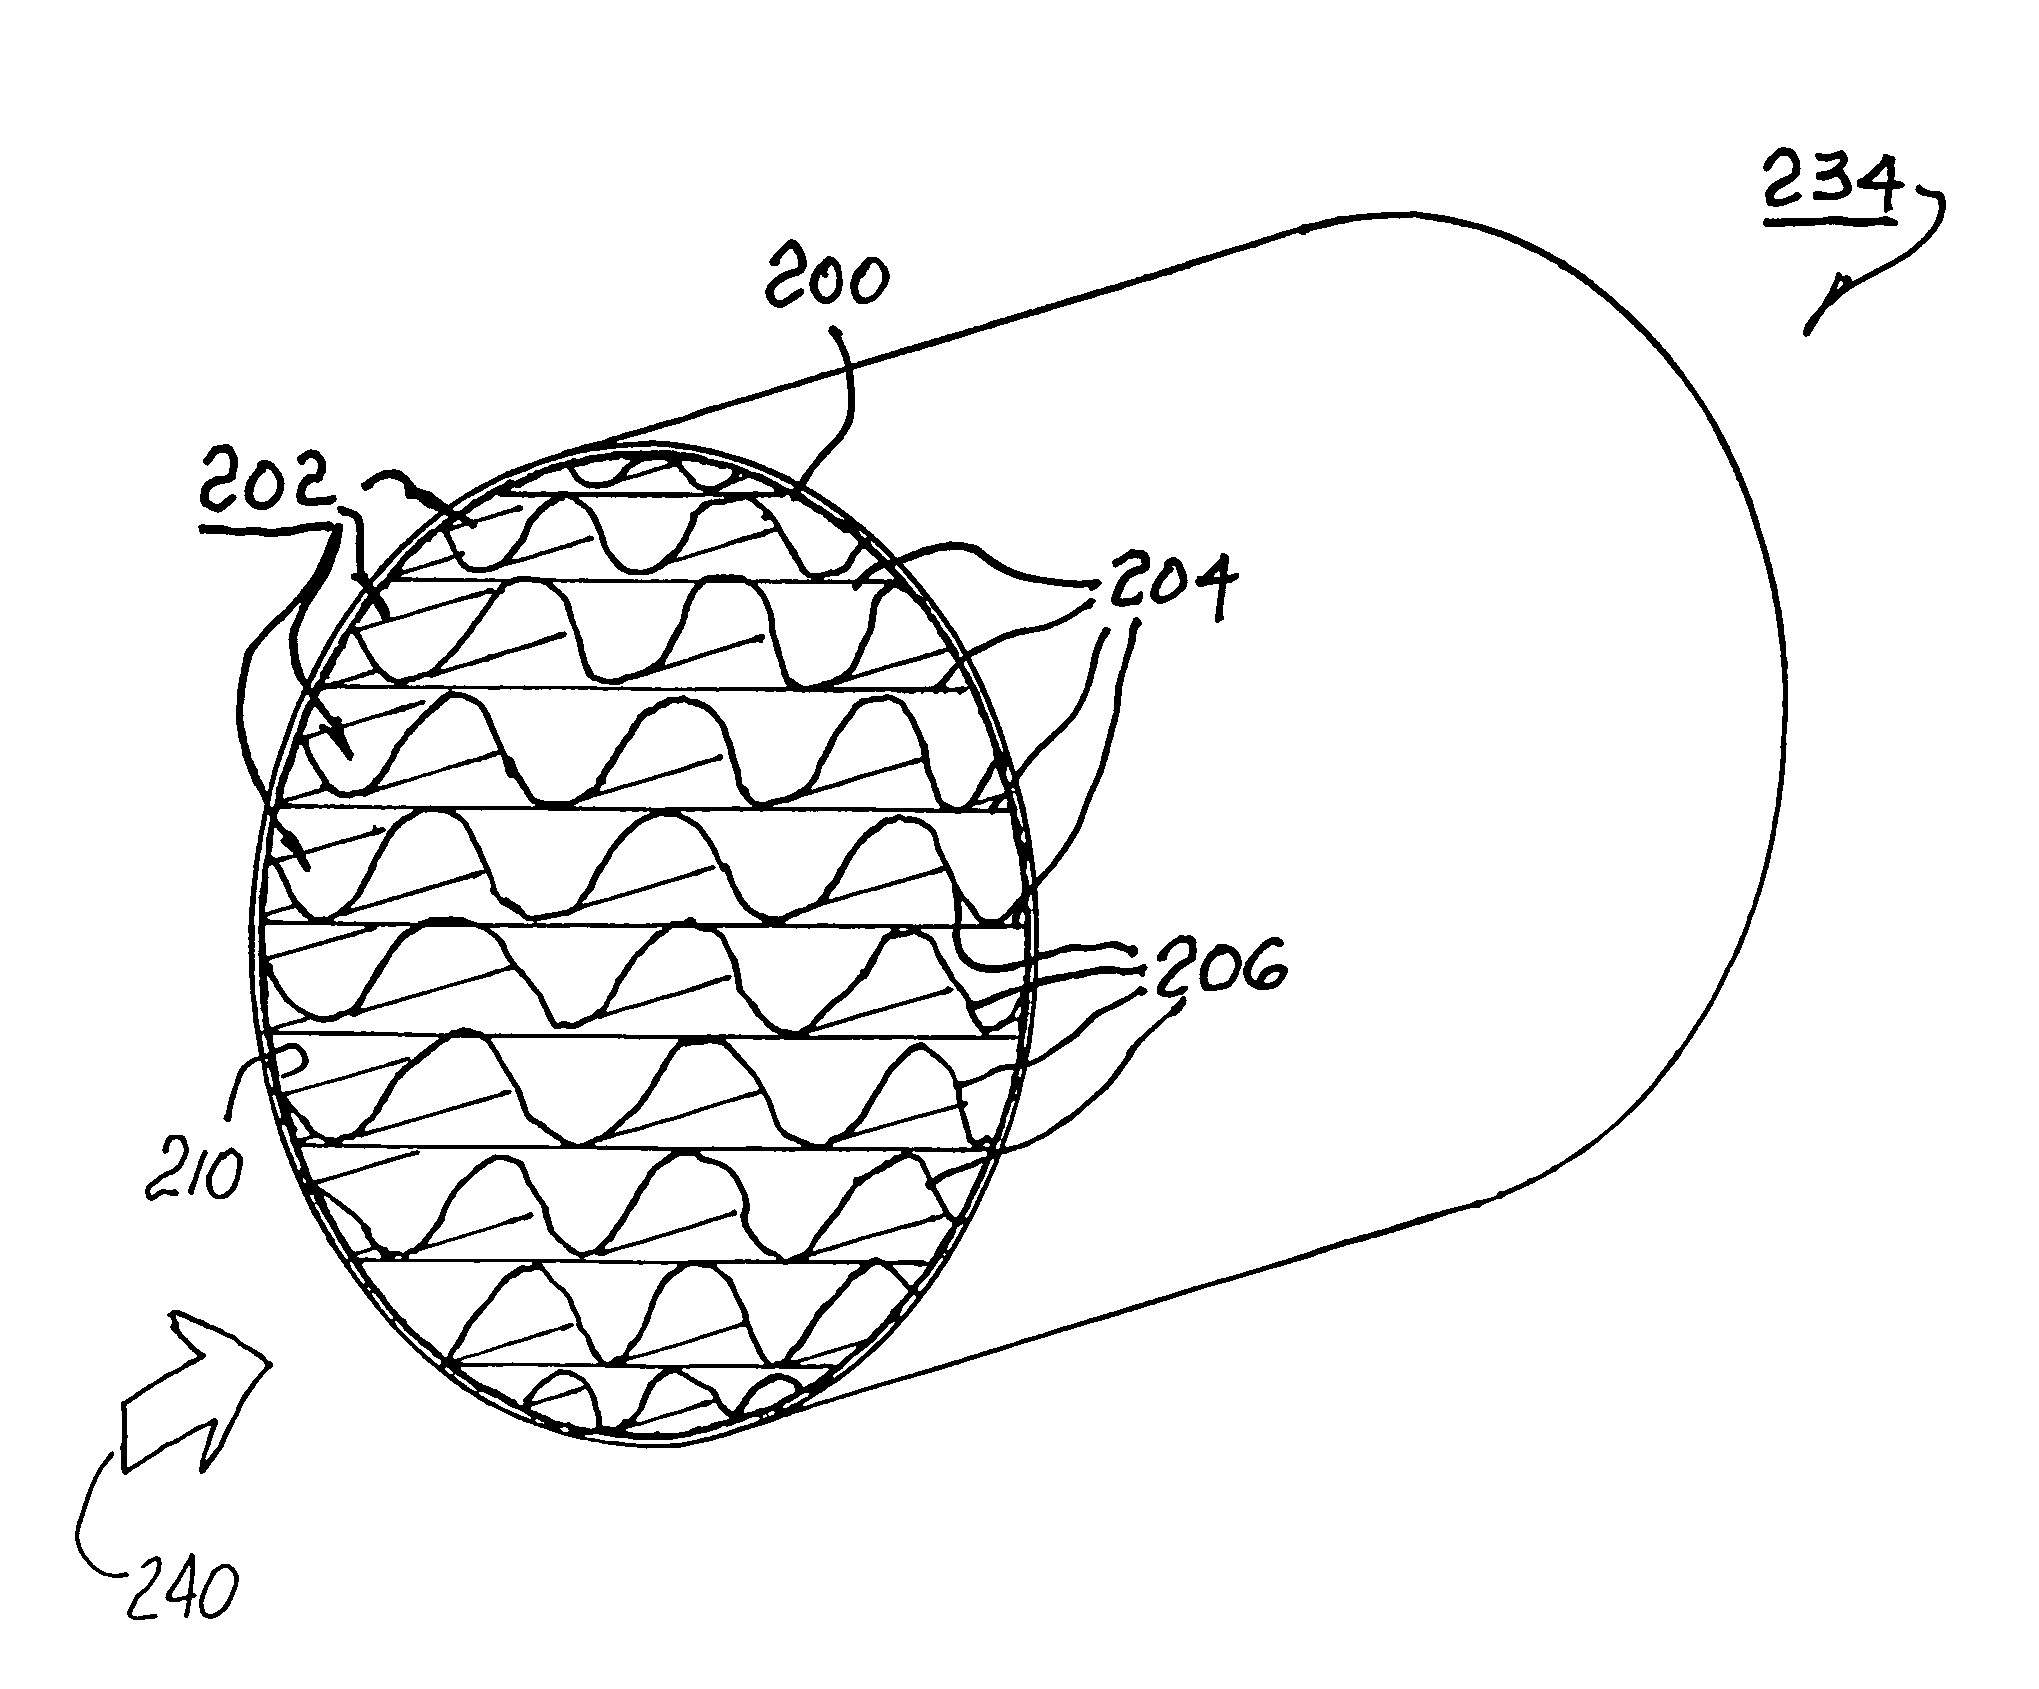 Low-resistance hydrocarbon adsorber cartridge for an air intake of an internal combustion engine